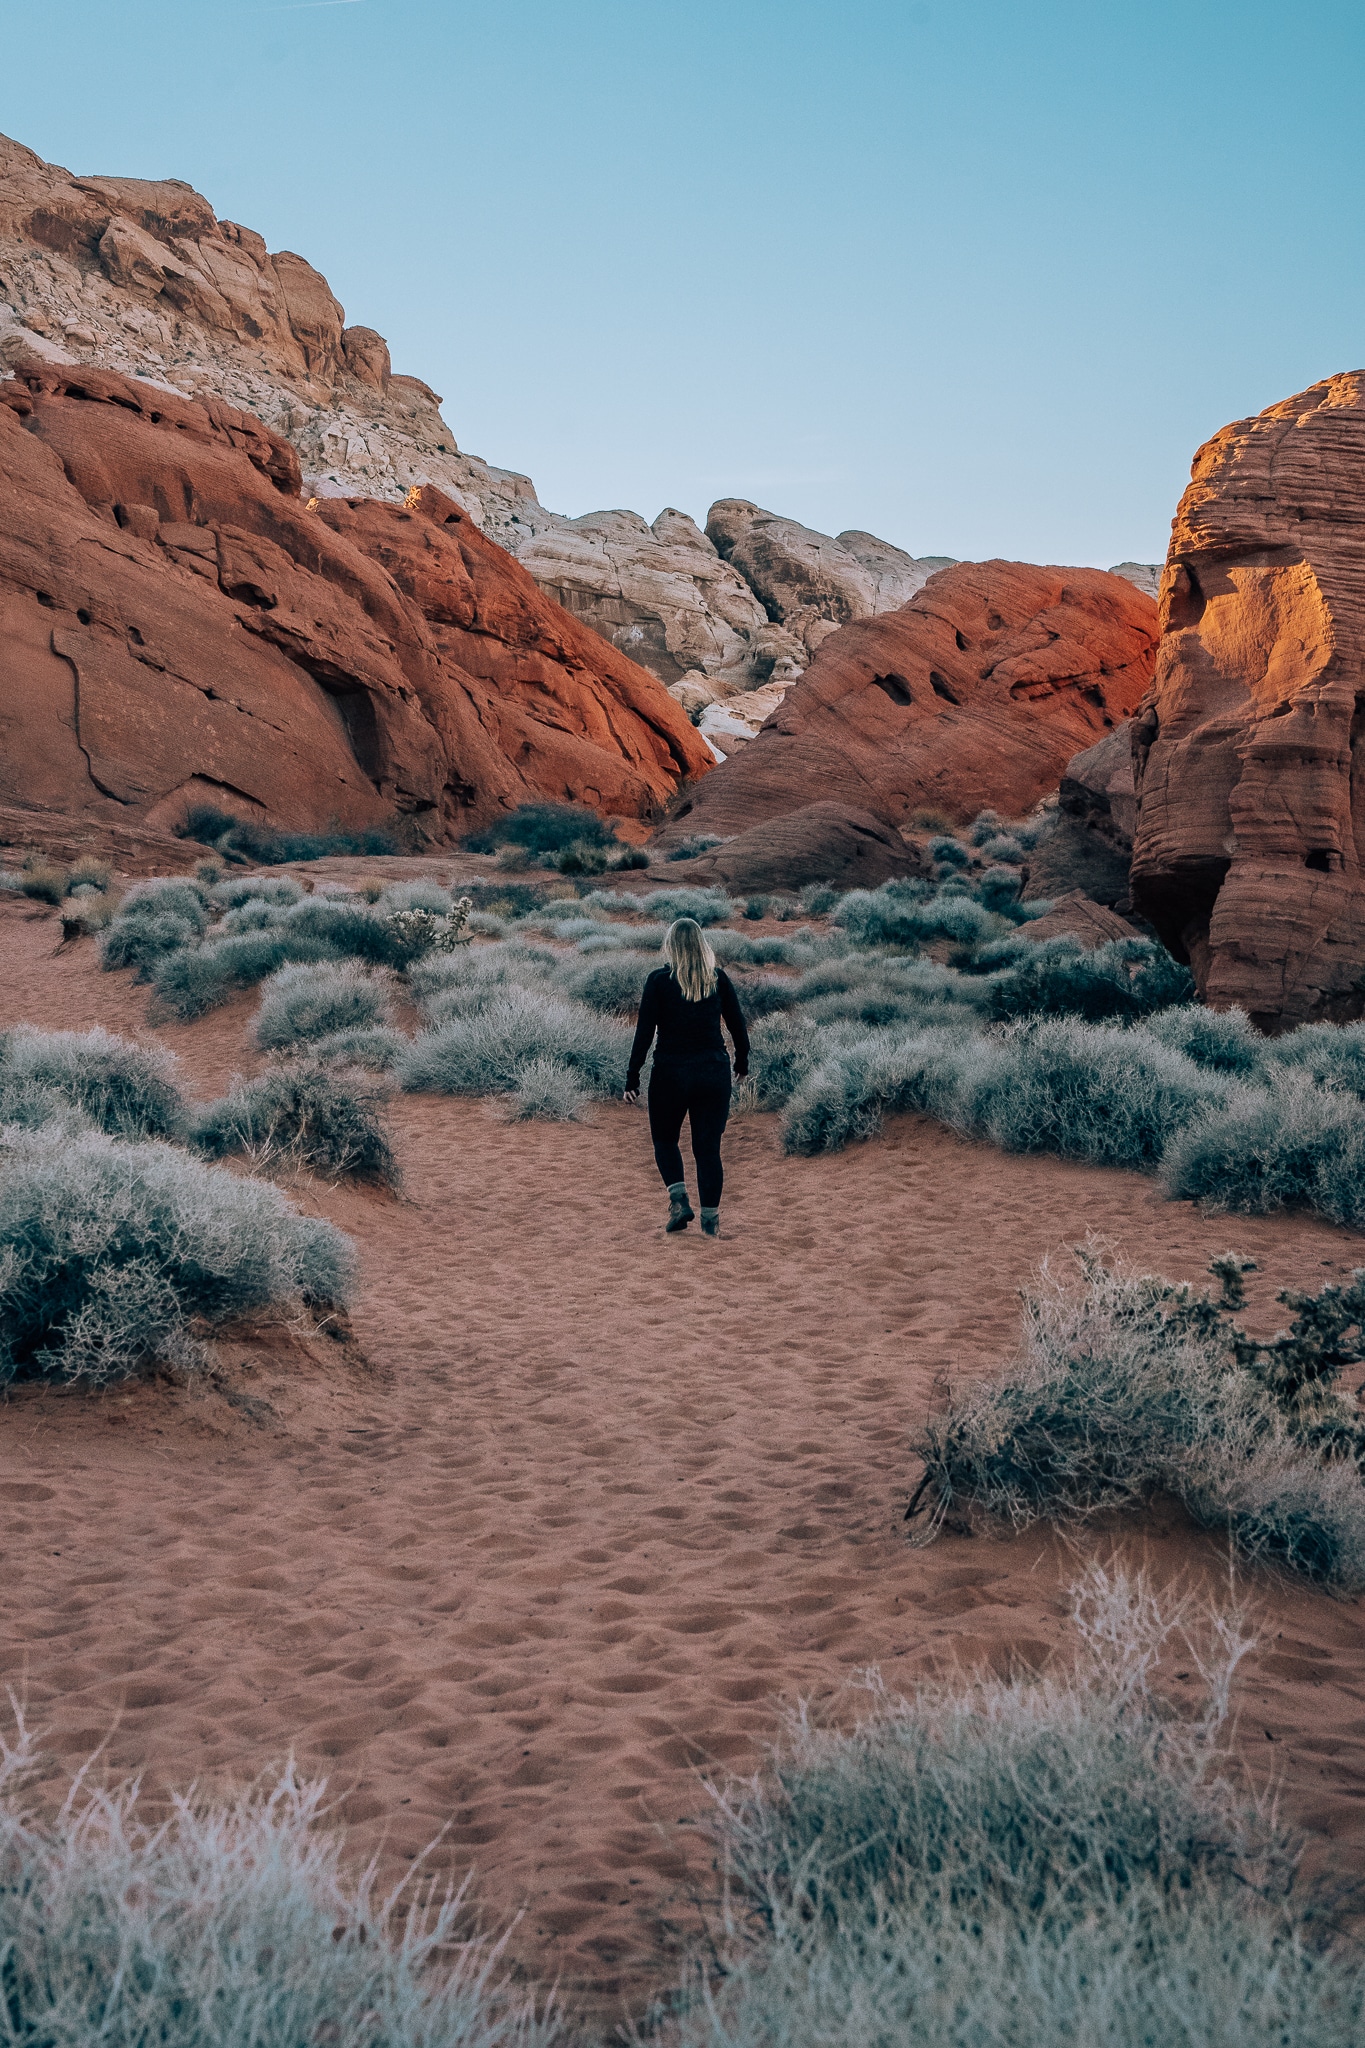 Woman walking in the sand through a hiking trail with red rocks in the background